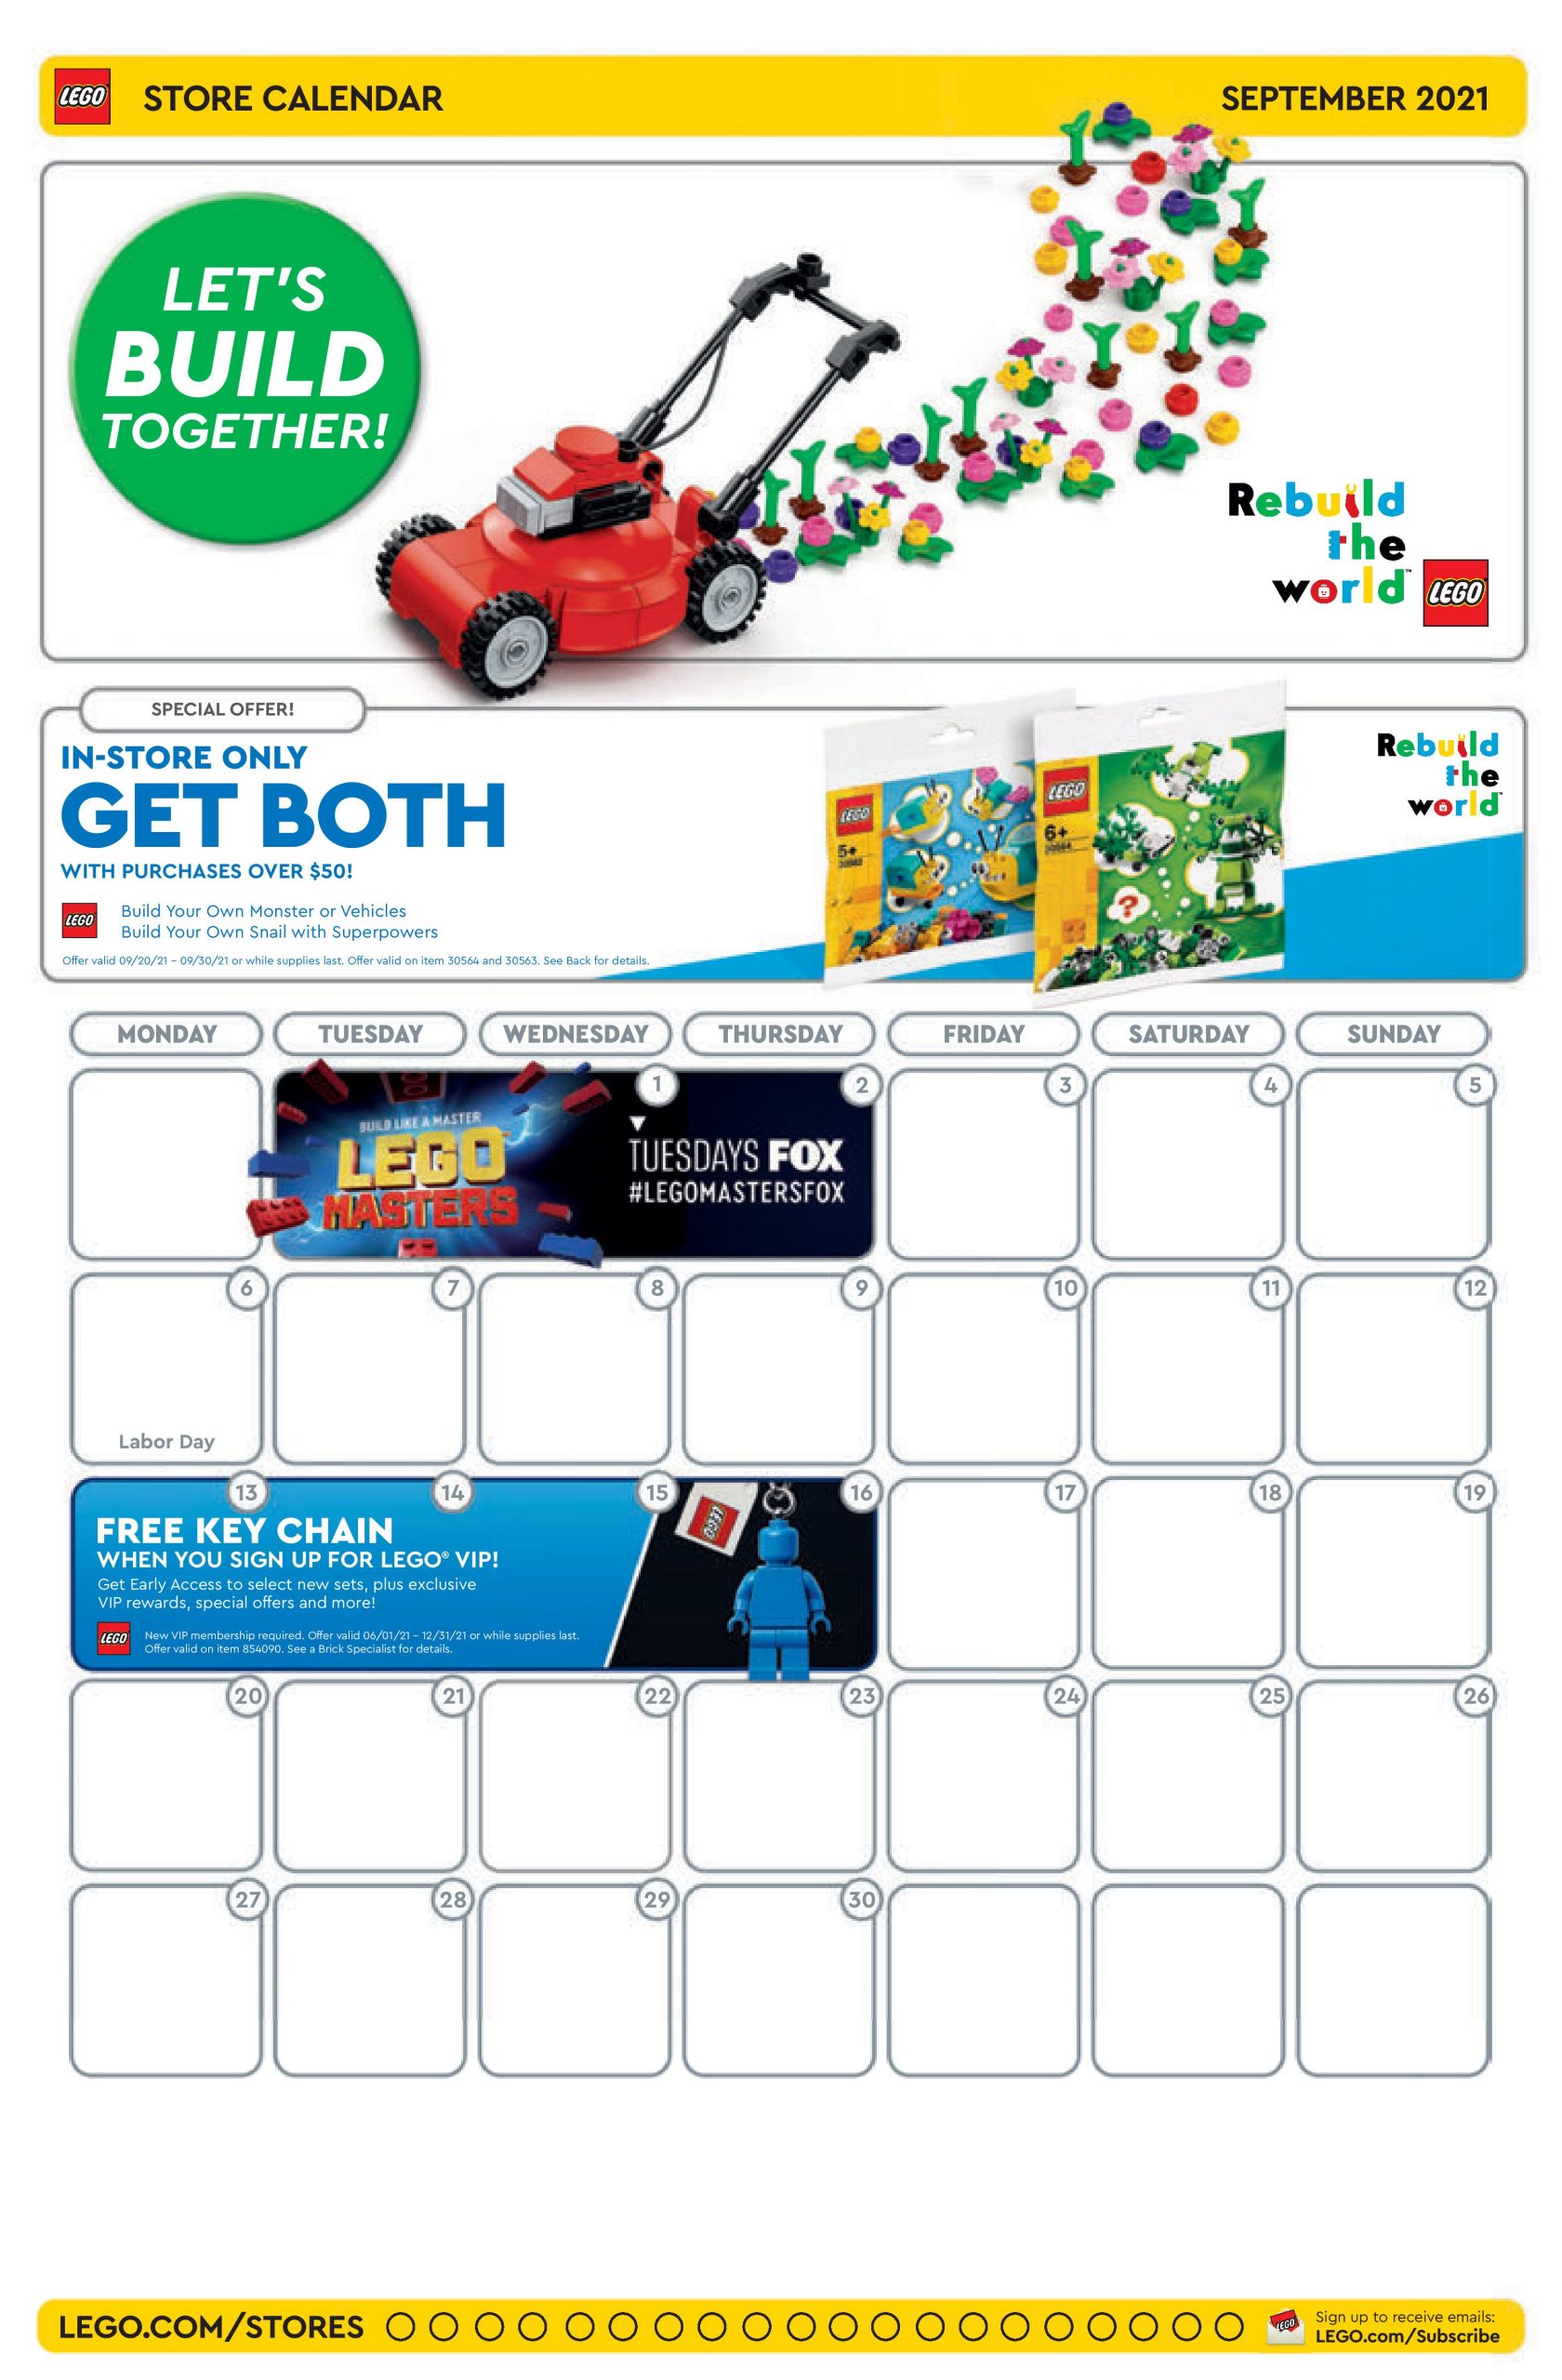 Lego August 2022 Calendar Lego September 2021 Store Calendar Promotions And Events - The Brick Fan